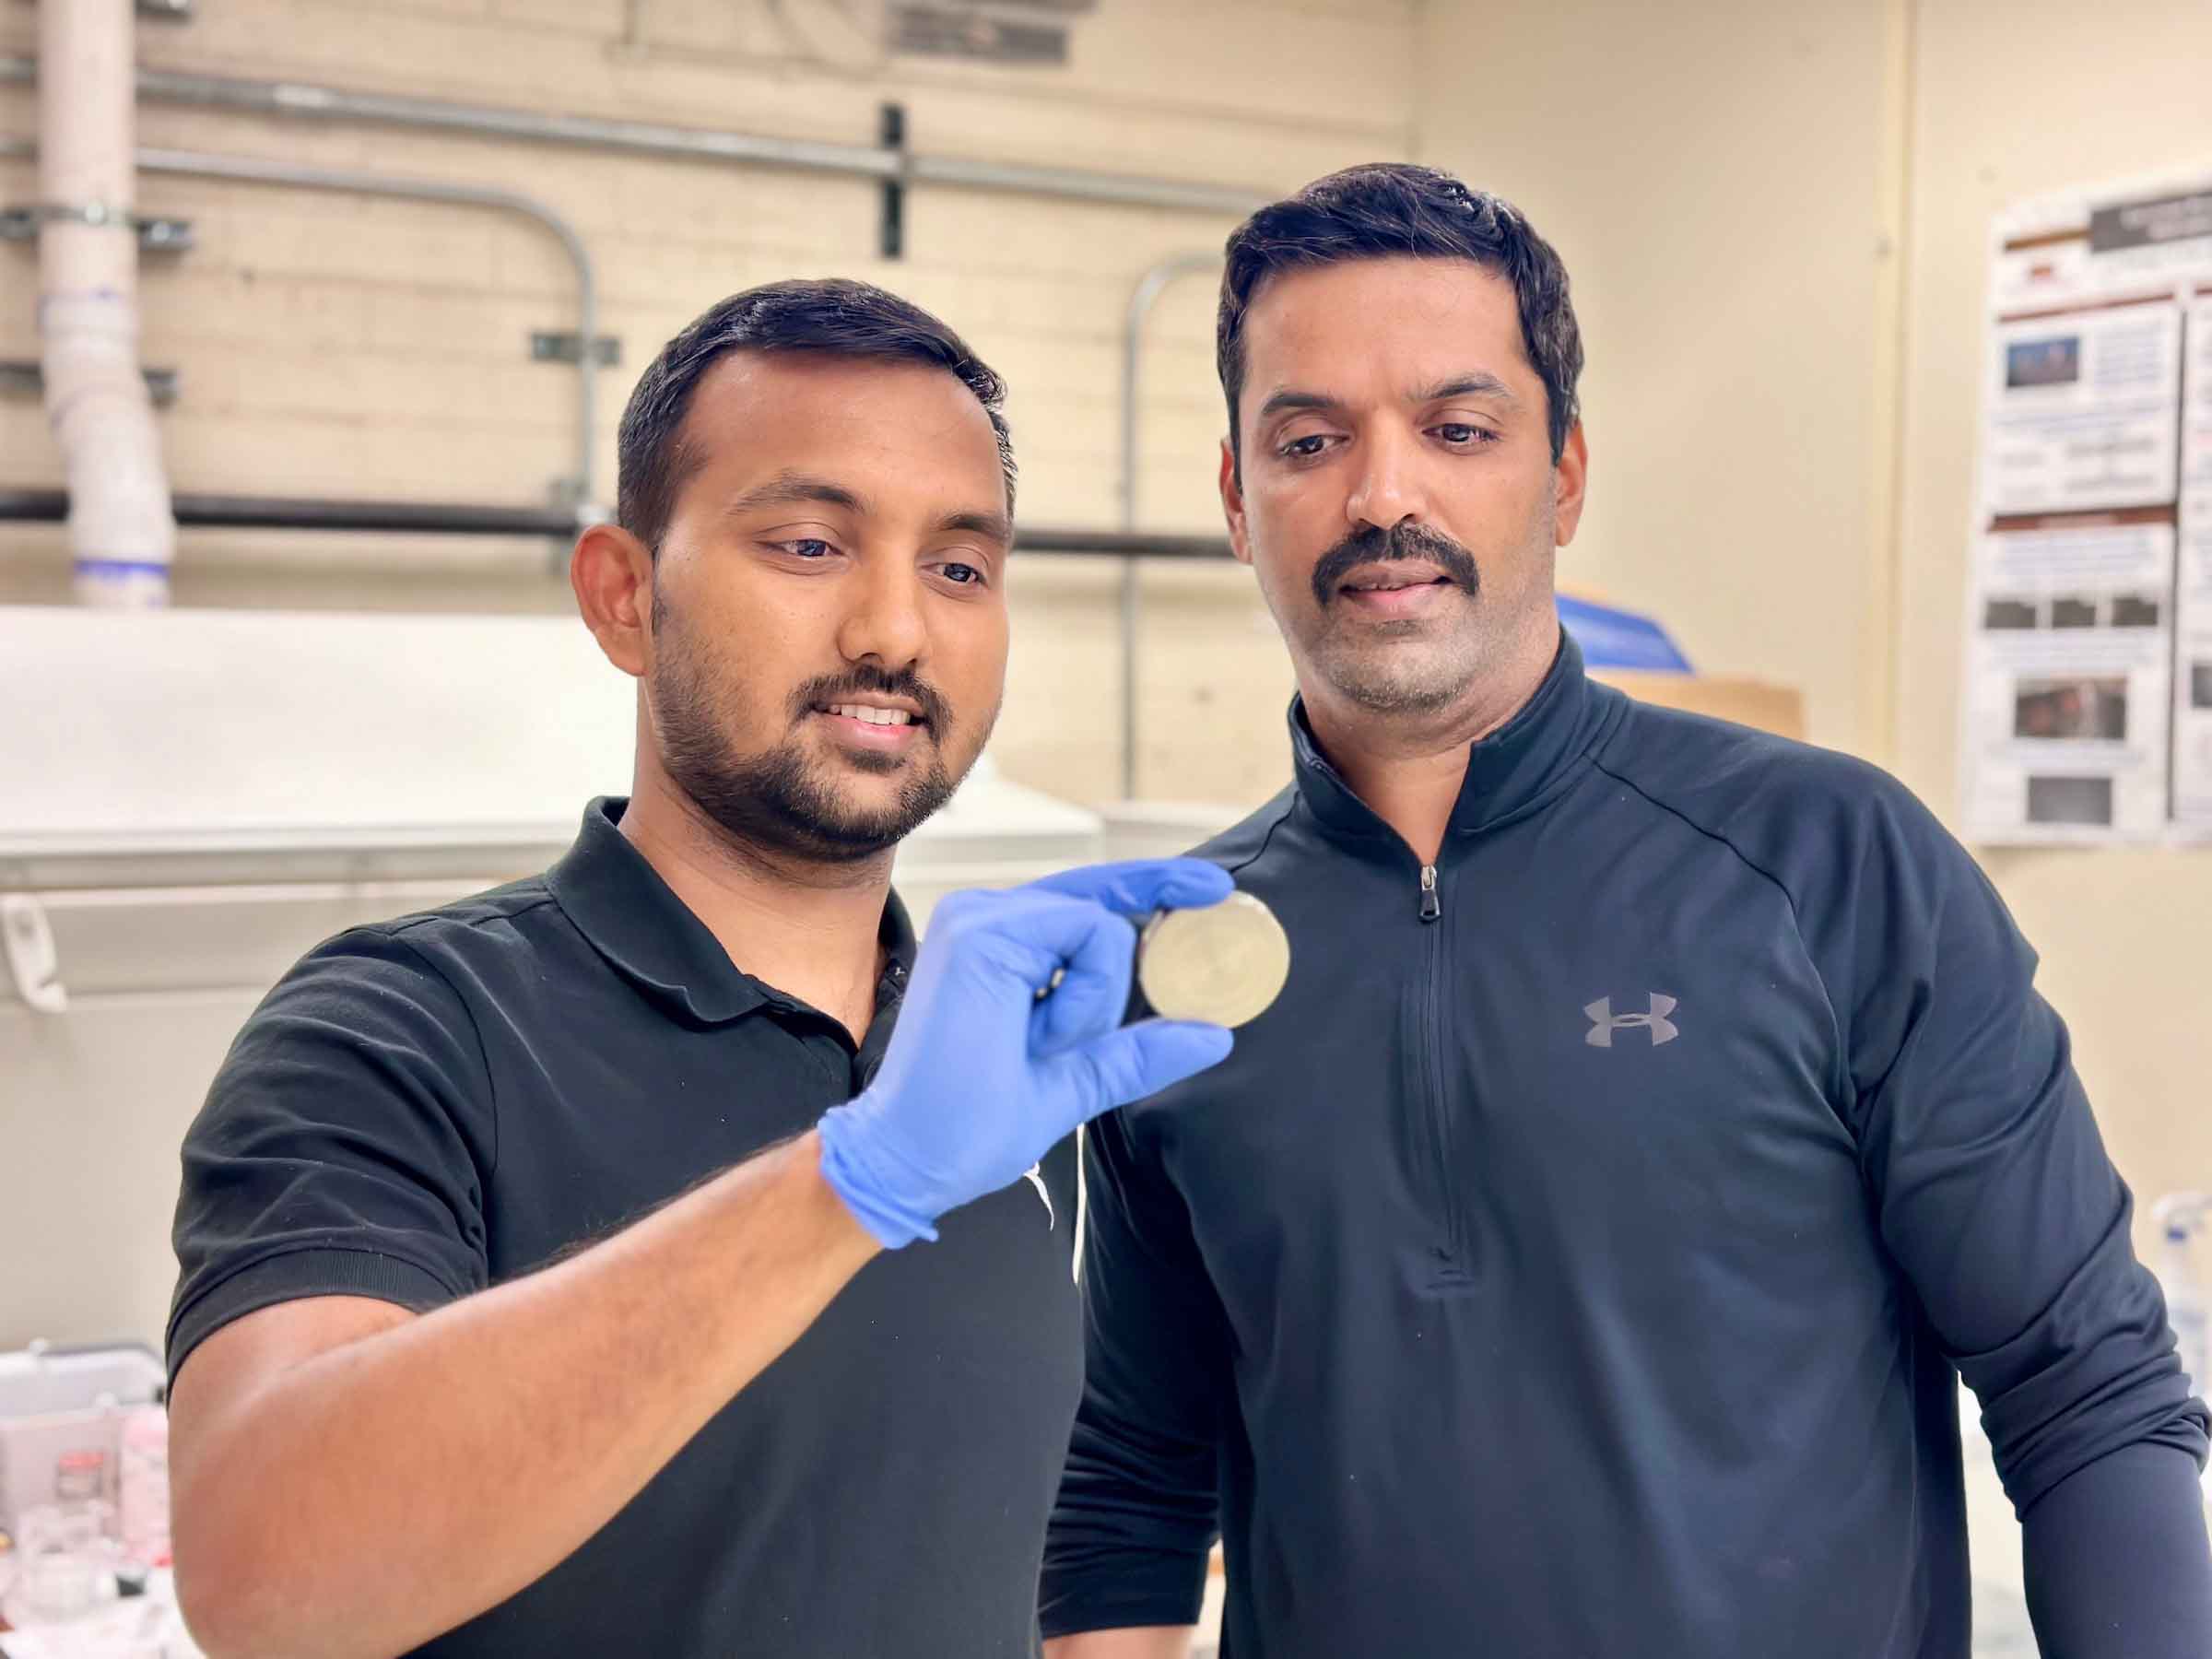 Kiran Solanki and Vikrant Beura stand together in Solanki's lab, looking at a metal disc